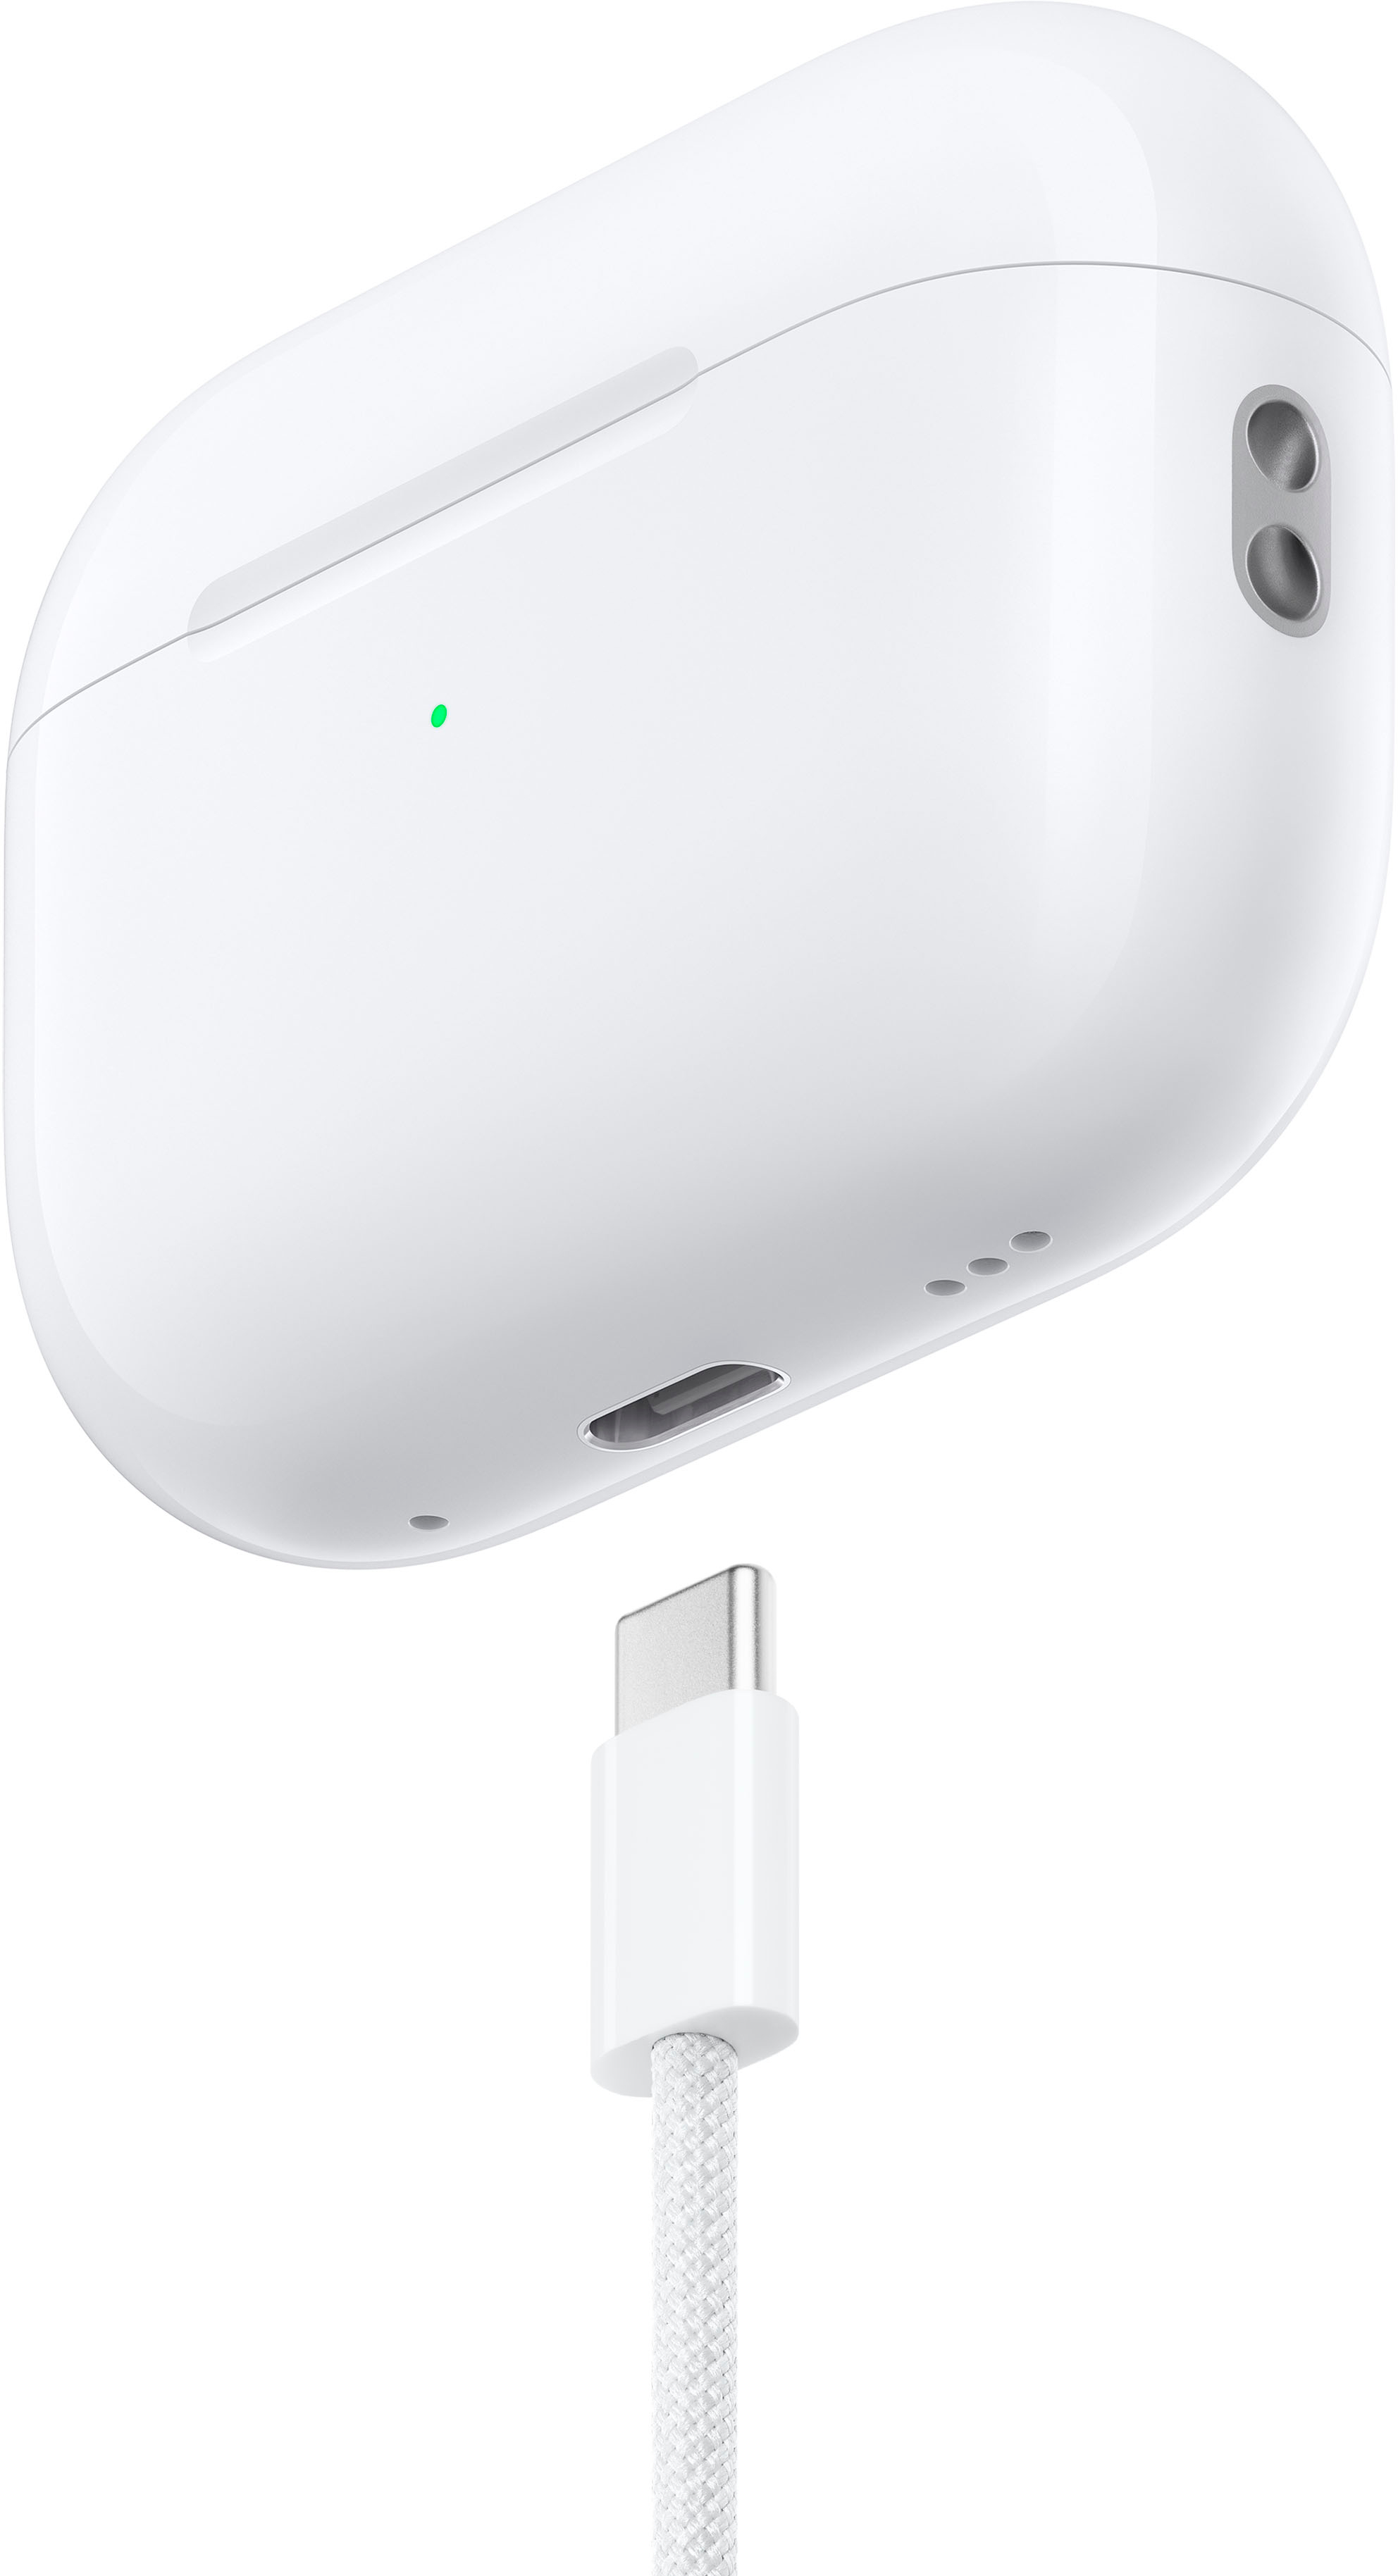 Apple AirPods Pro With Wireless Charging Case White MWP22AM/A Authentic  190199247017